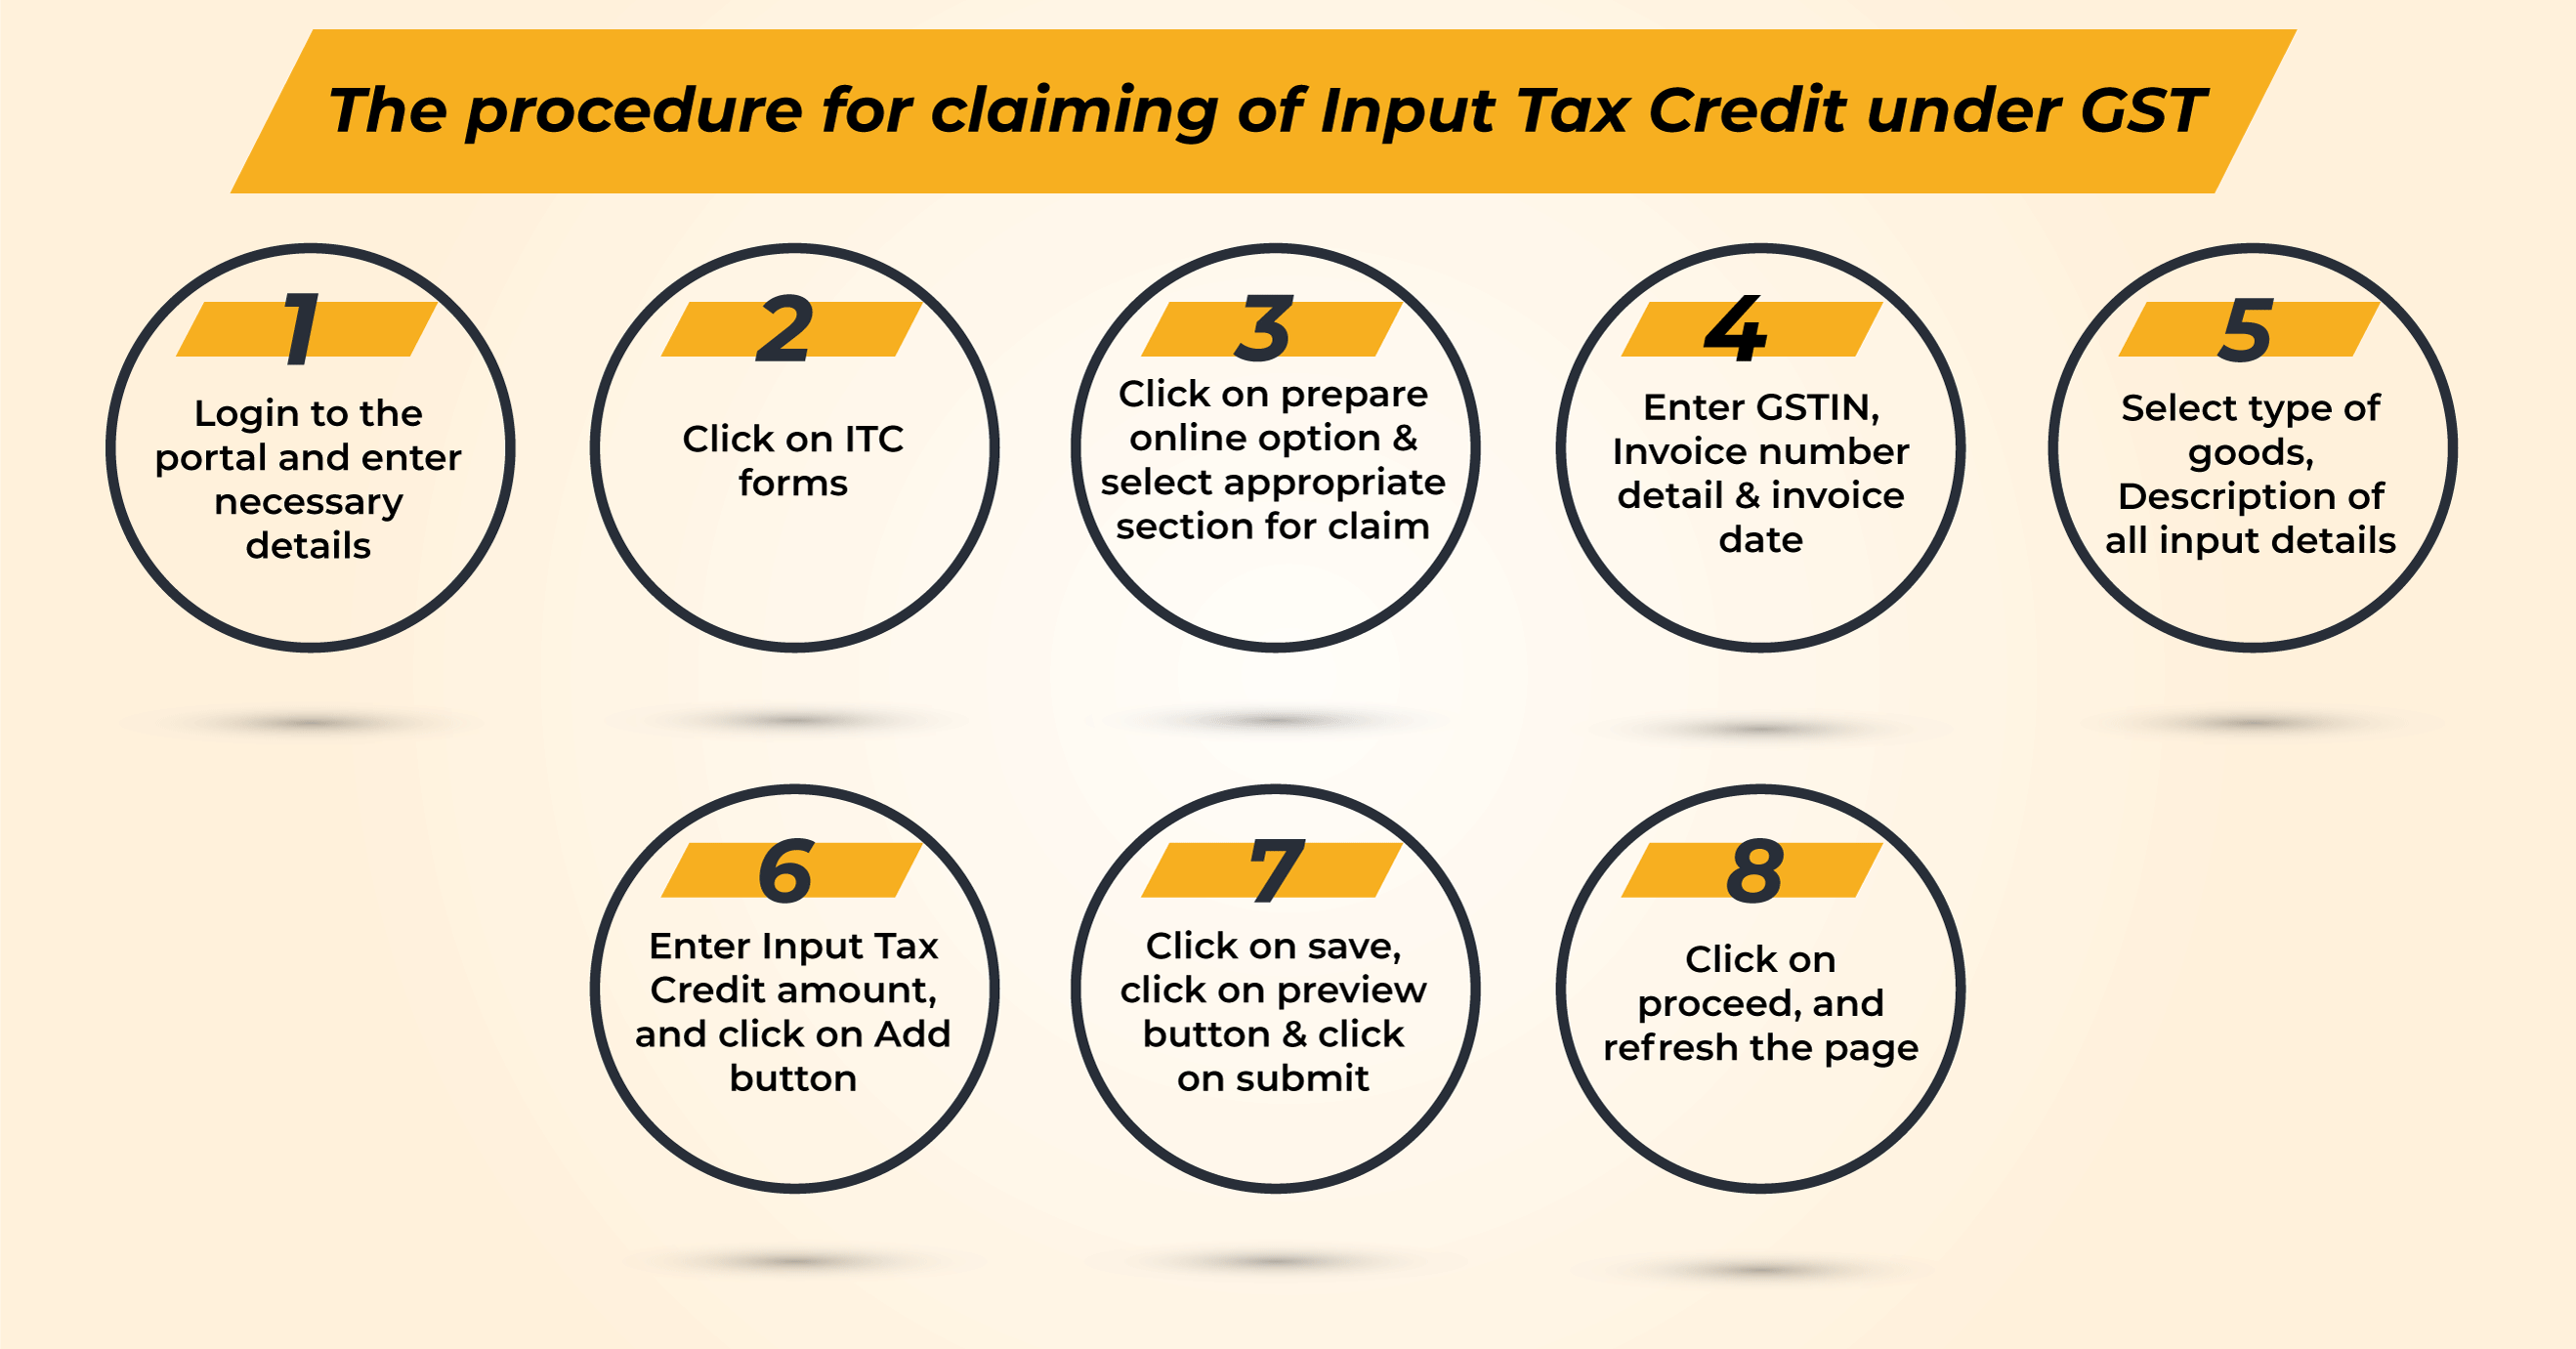 gst-input-tax-credit-definitions-and-conditions-for-claiming-gst-itc